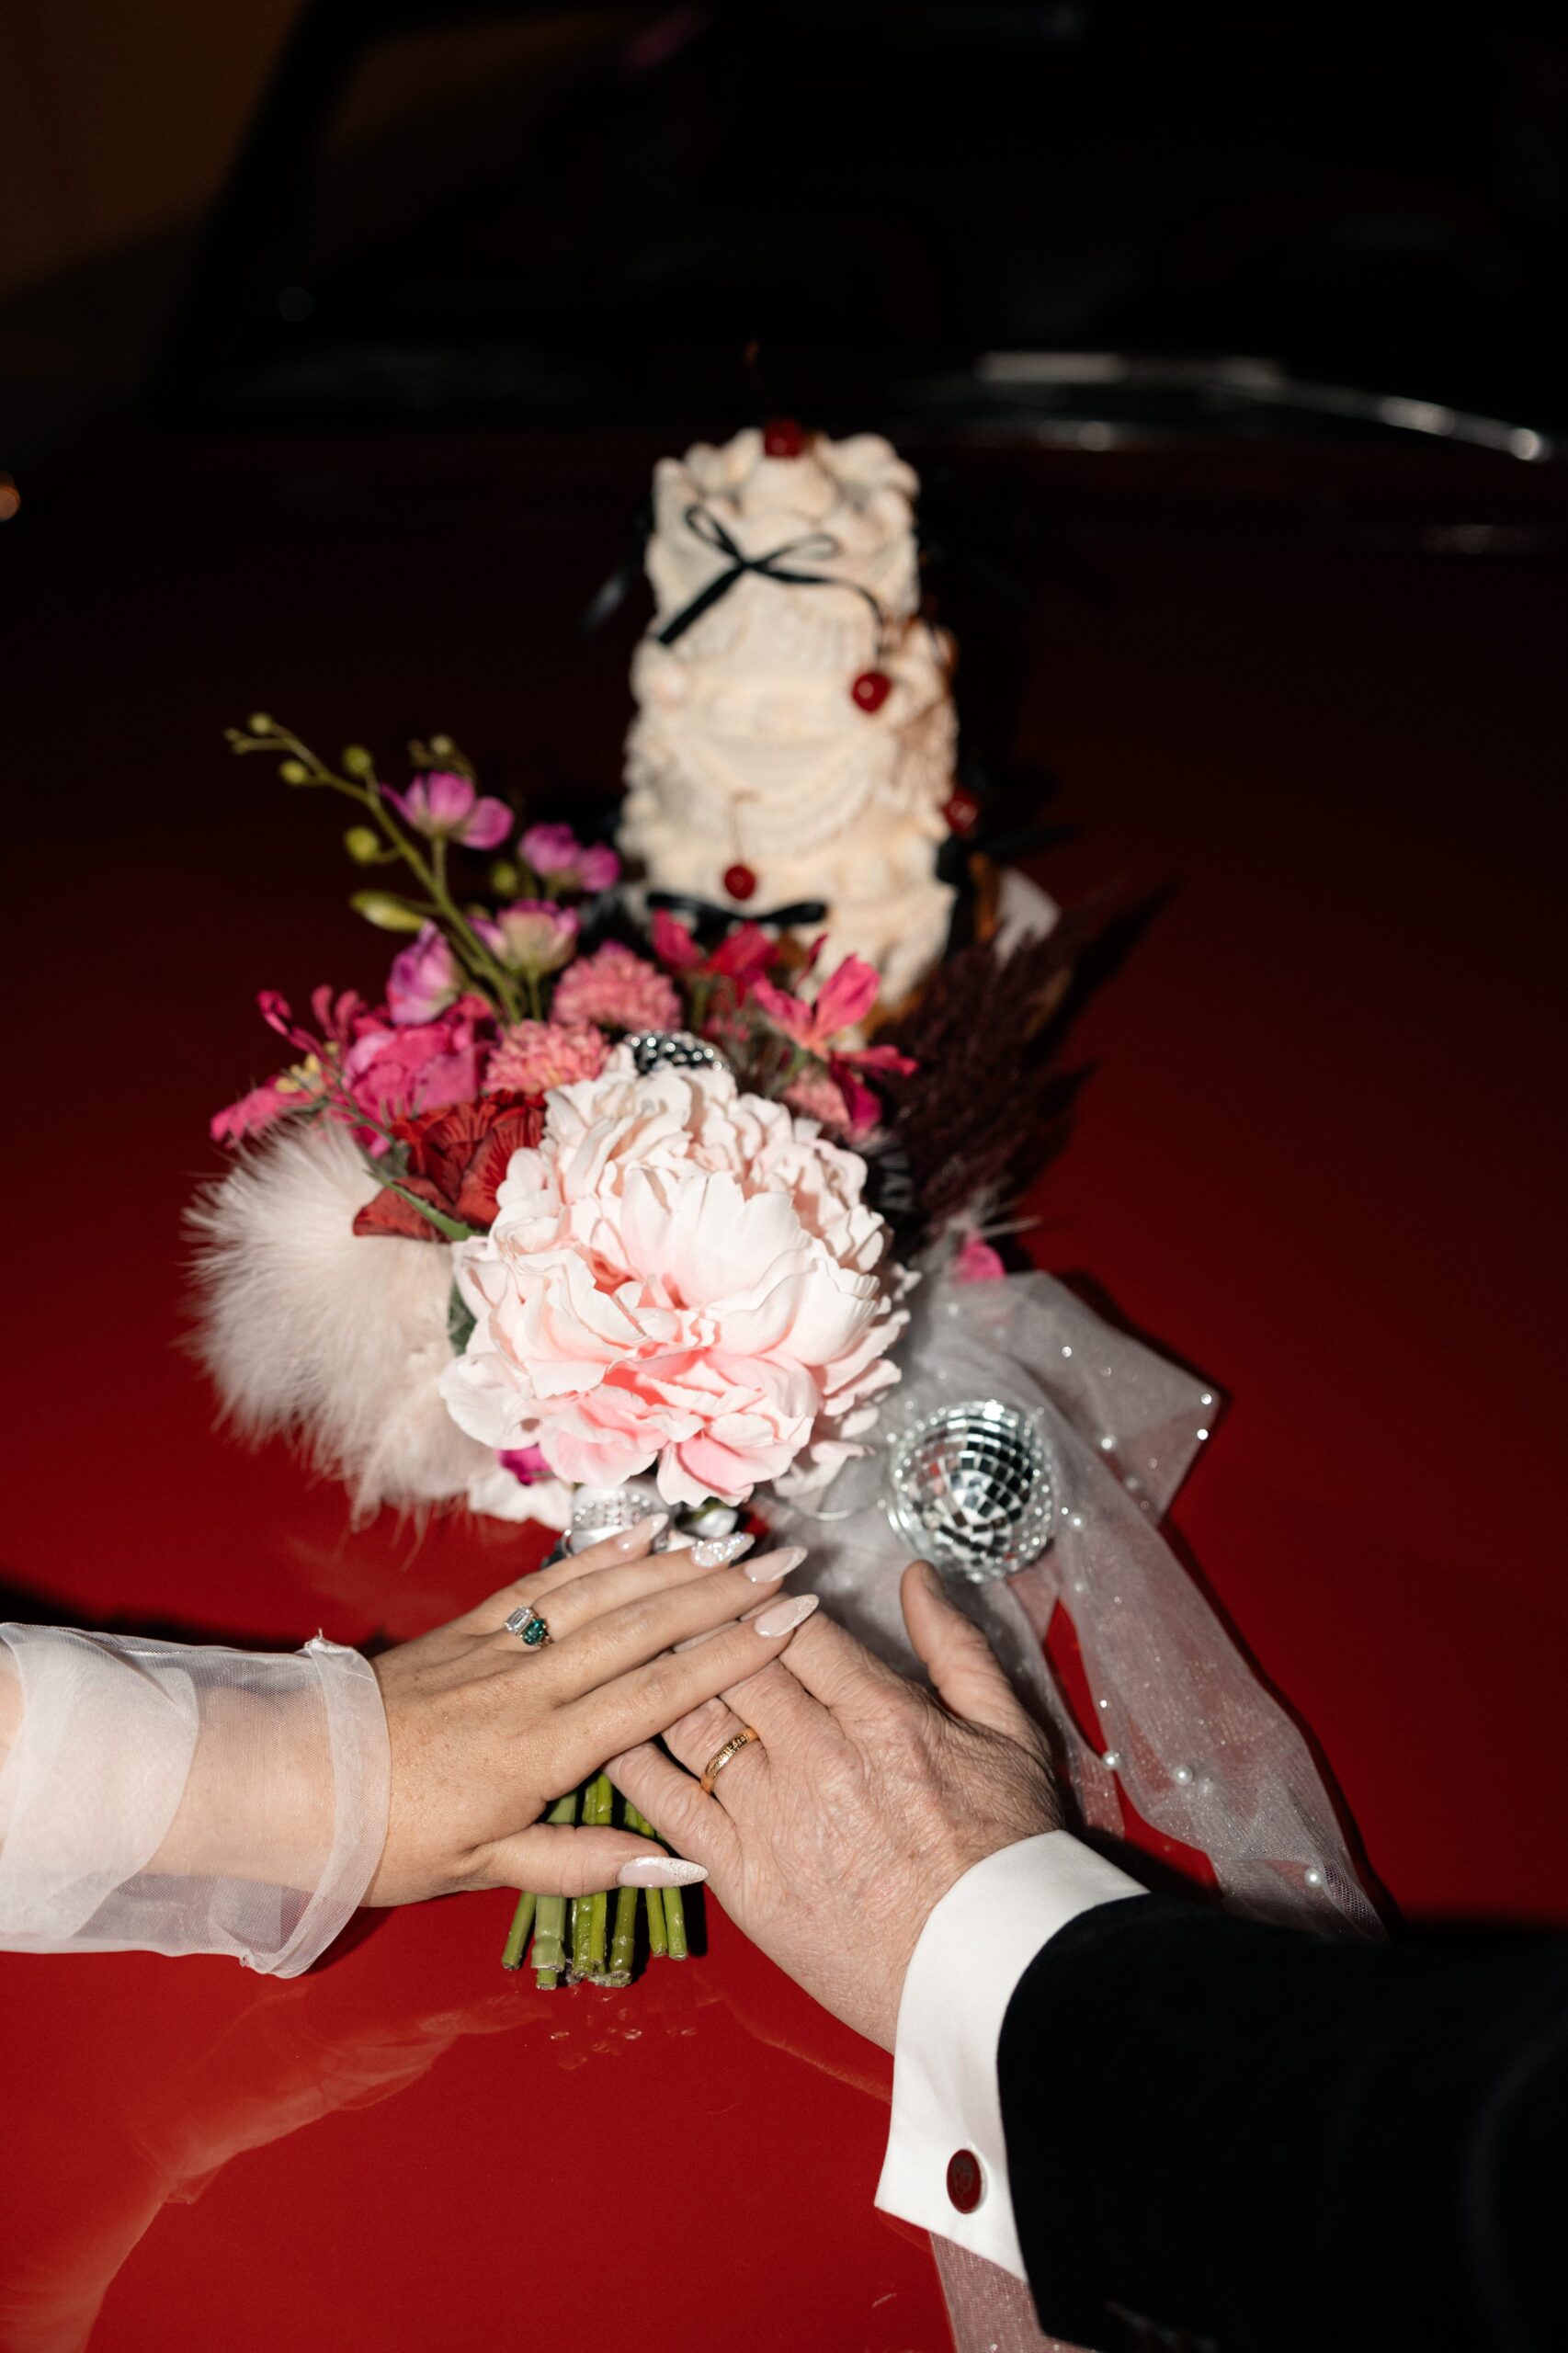 Photo of a bride and groom holdings hands with a cake and wedding bouquet in the background